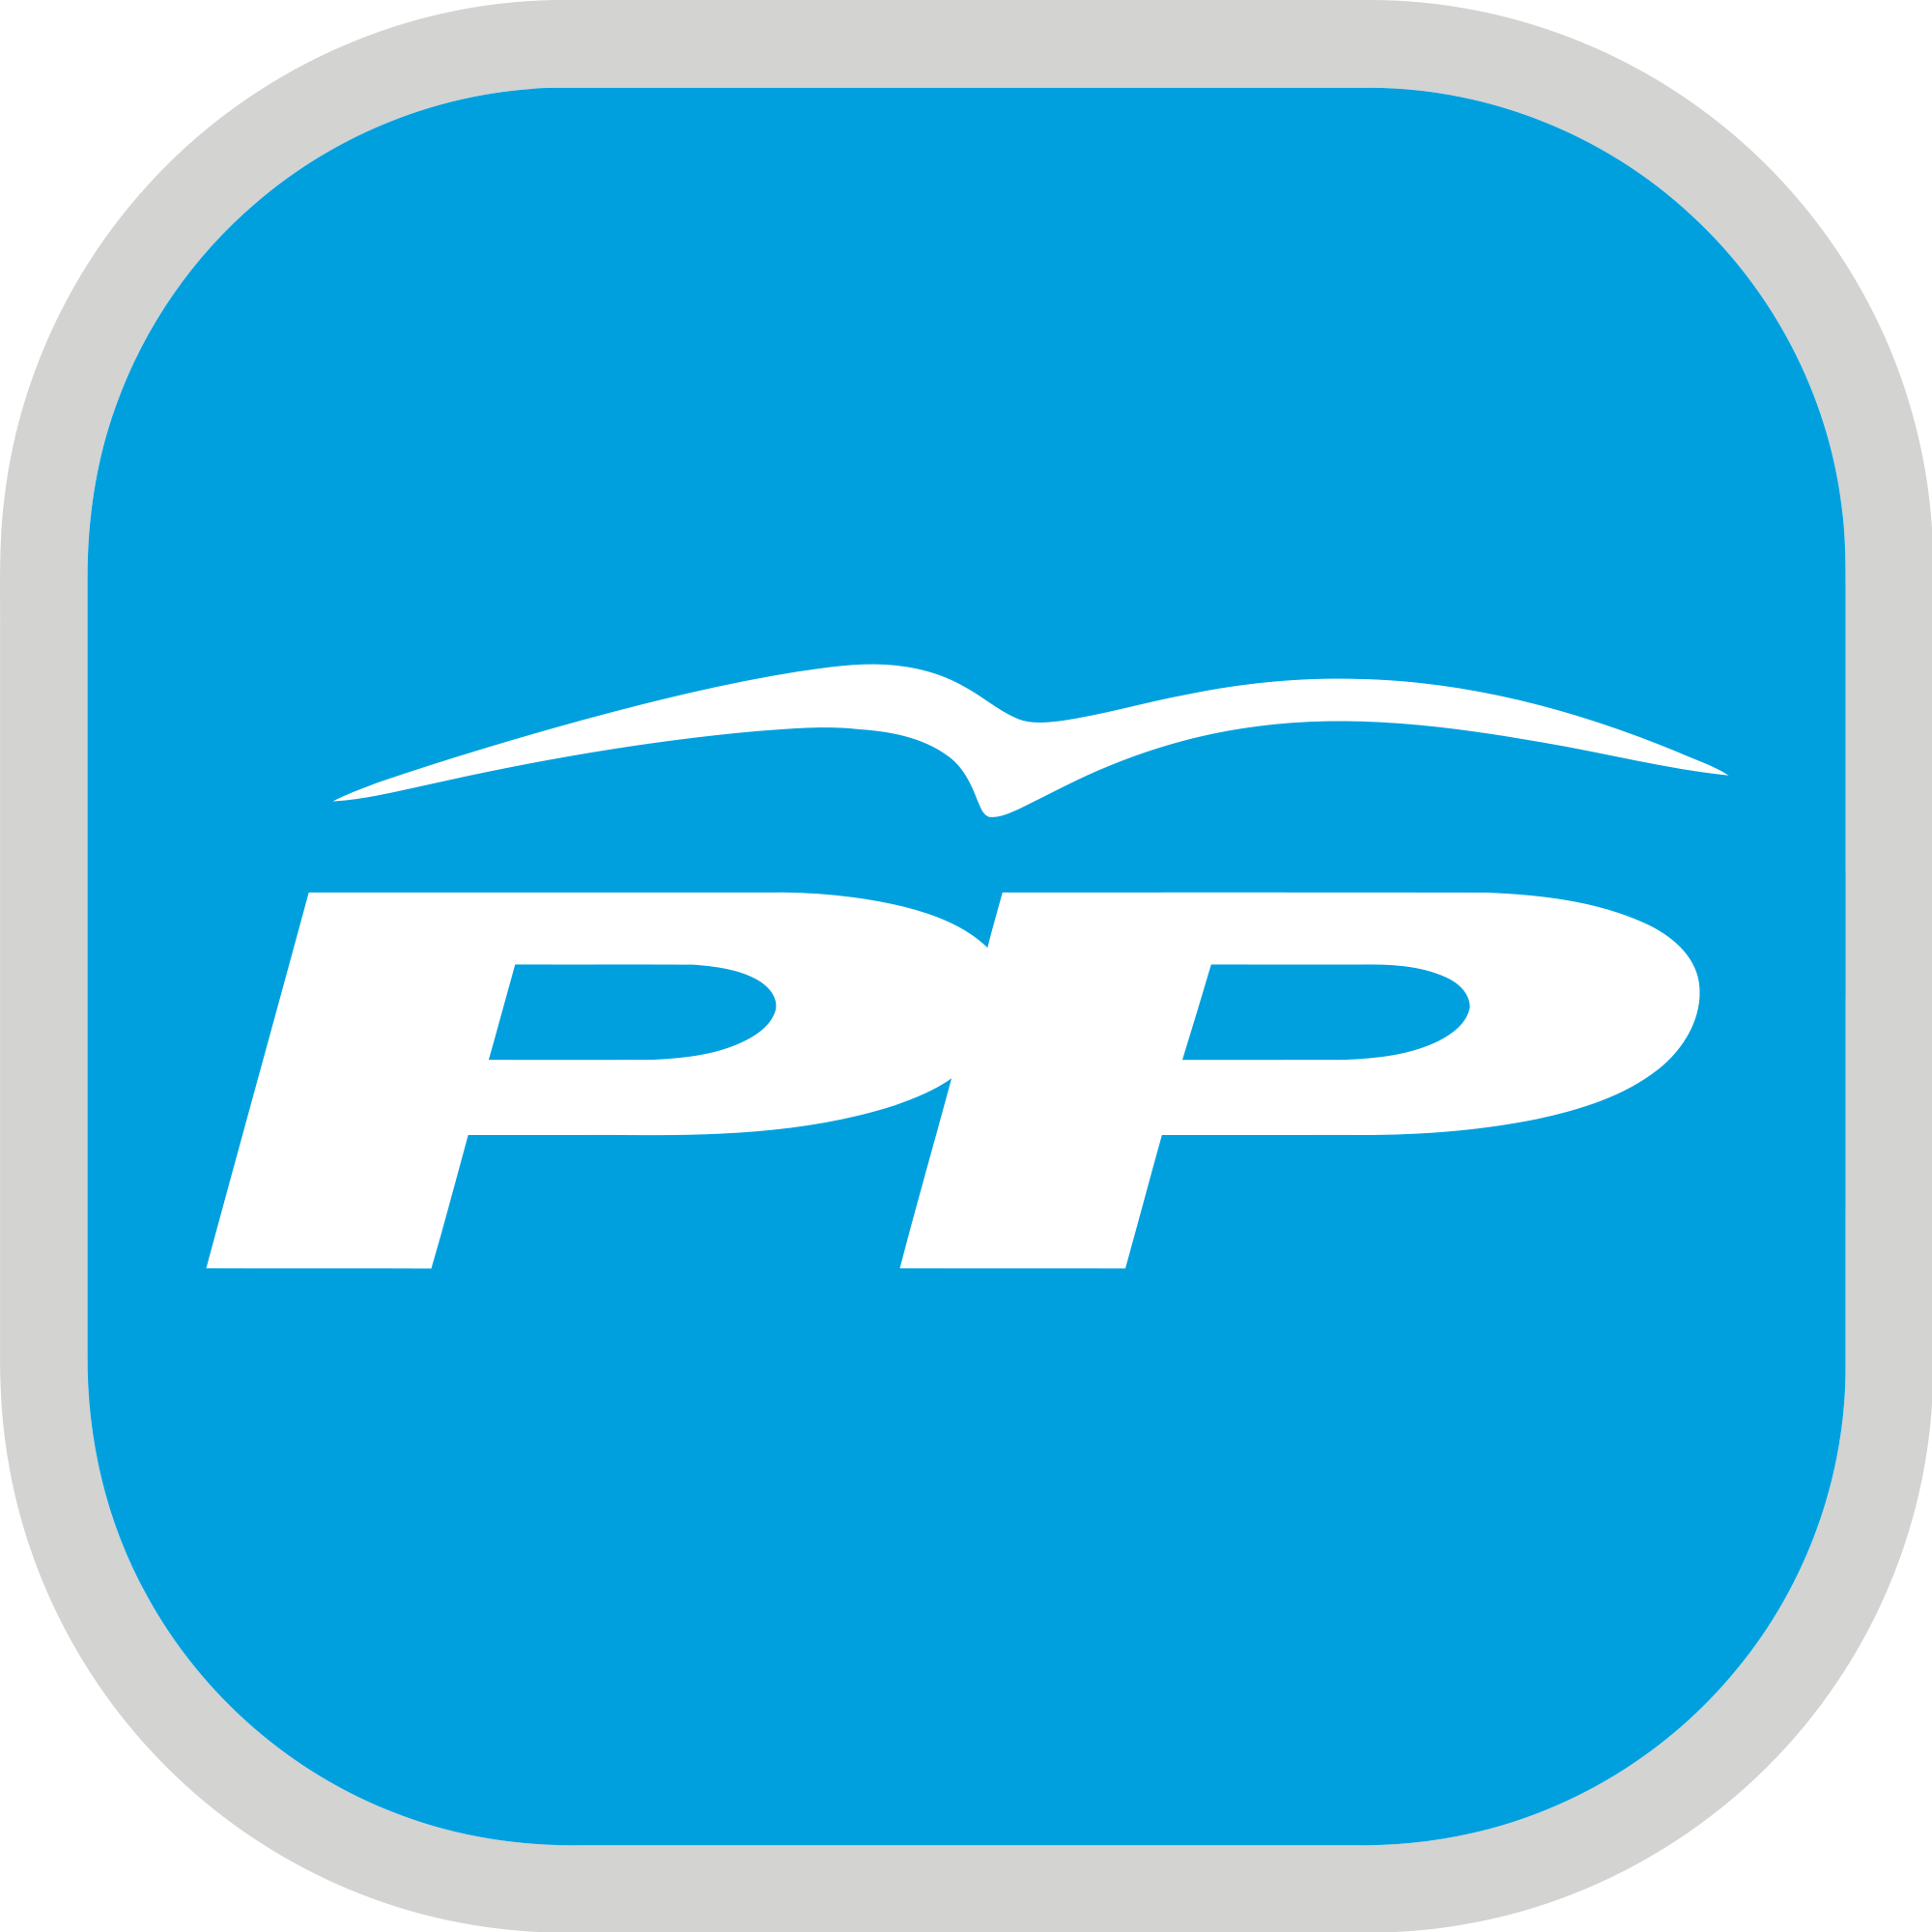 File:People's Party (Spain) logo.png.